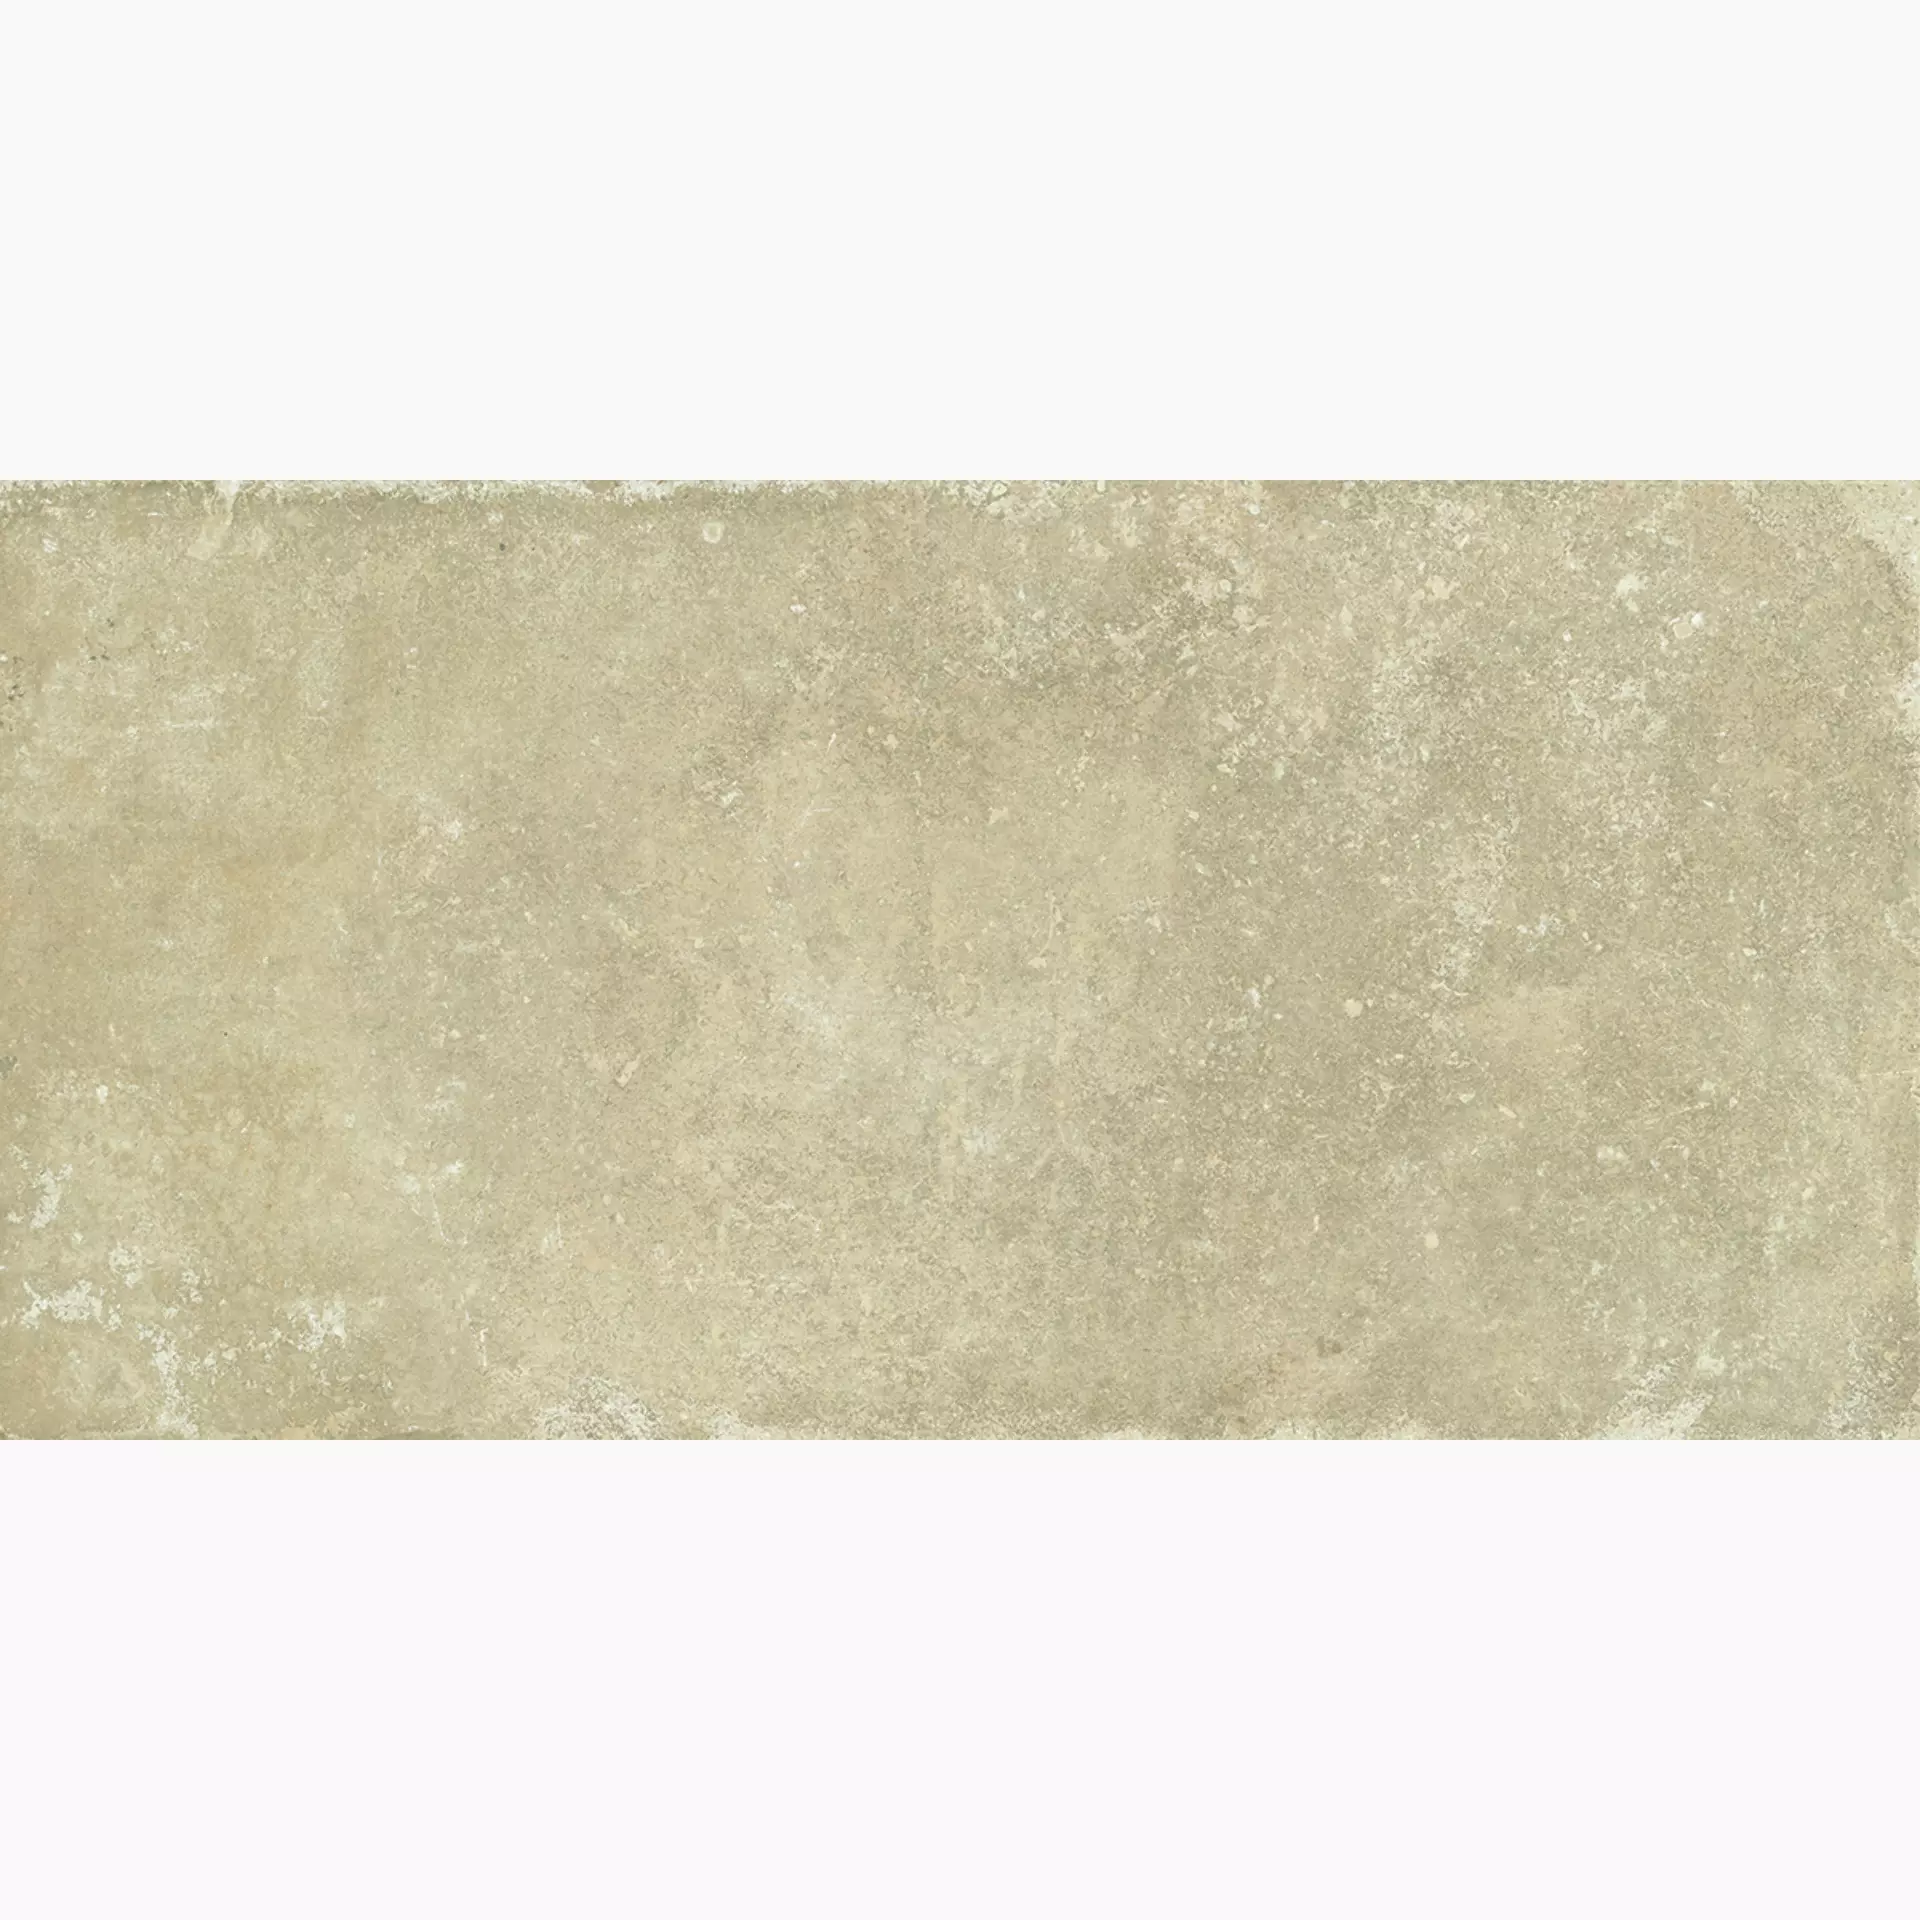 Alfalux Cottage Taupe Grip 8290031 60x120cm rectified 20mm